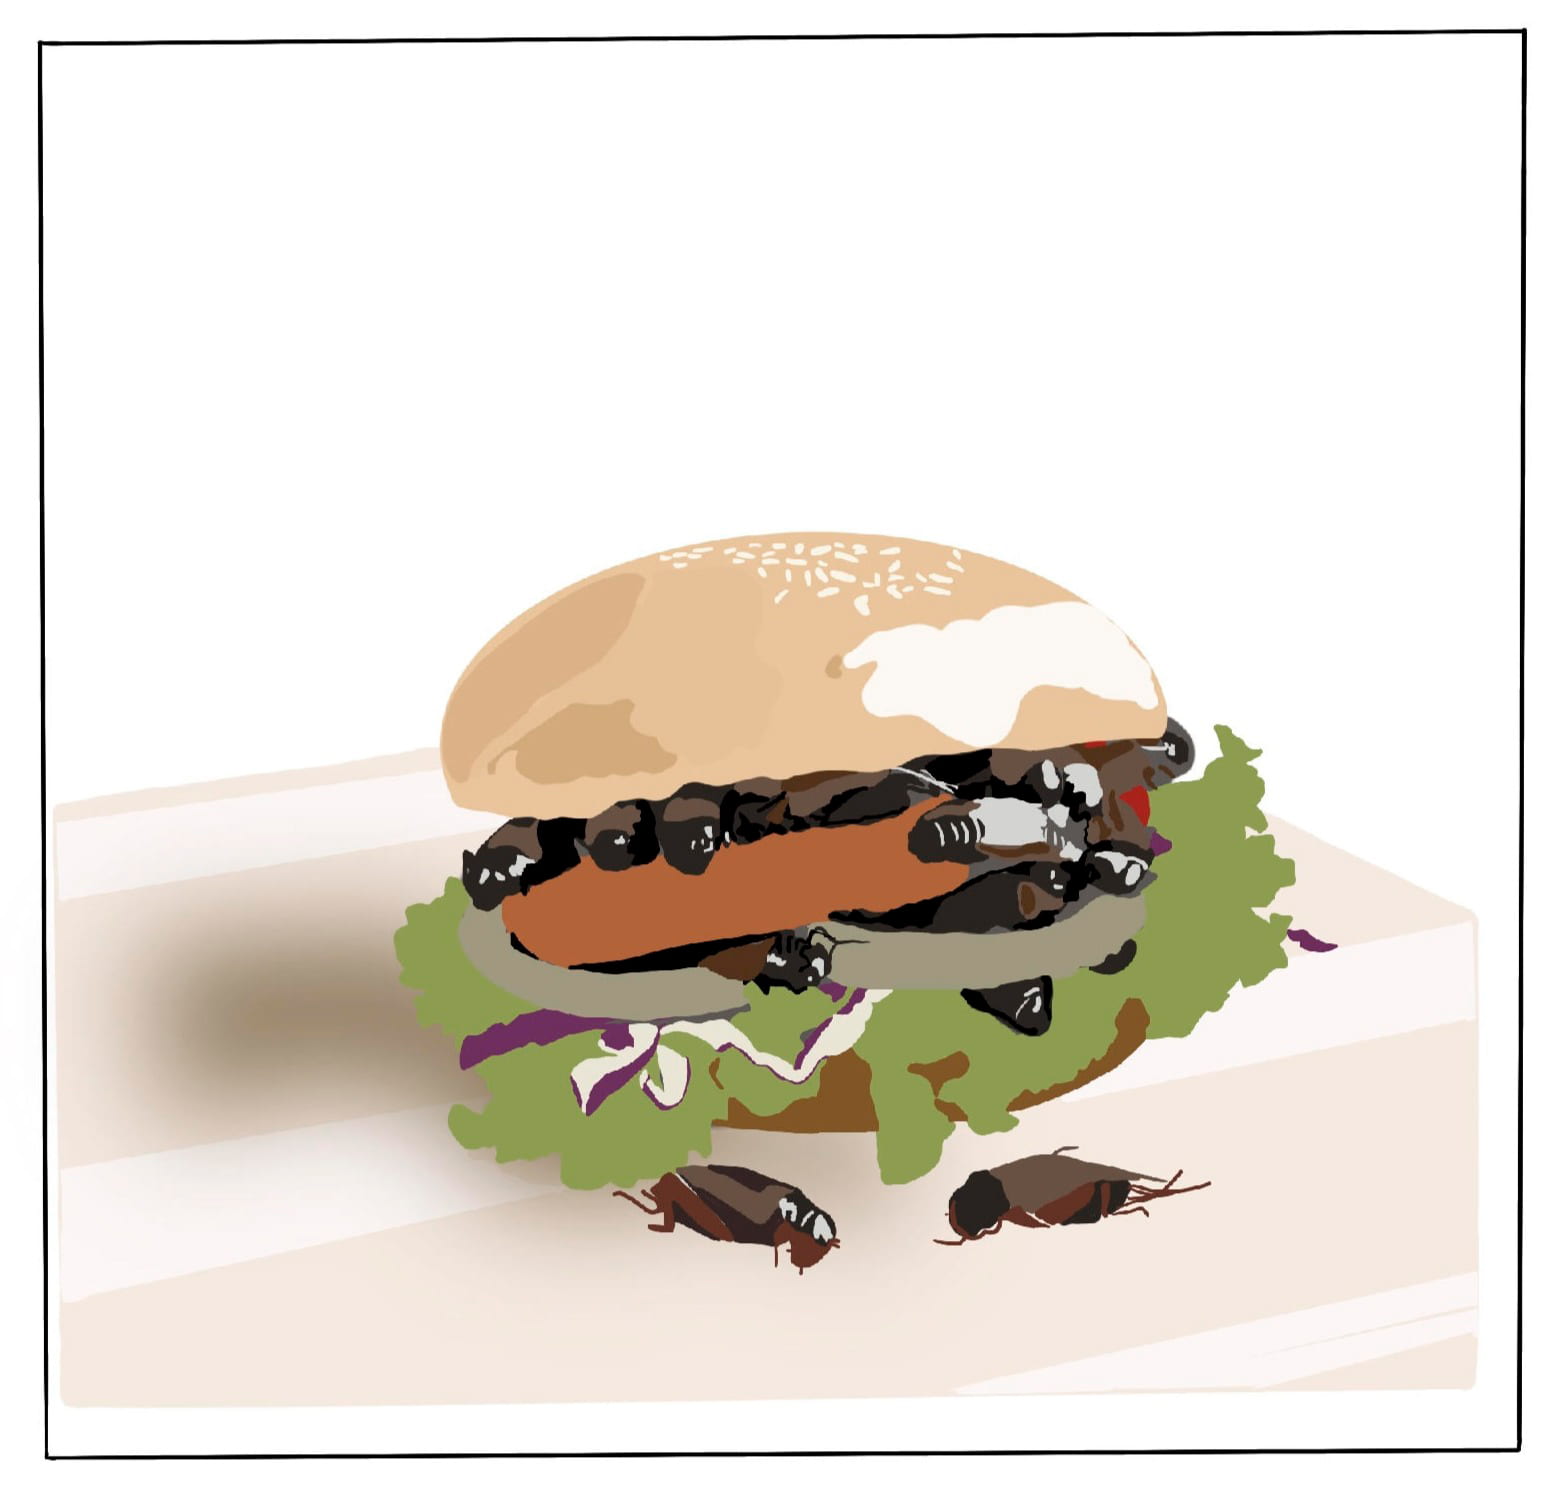 an illustration of a burger made out of crickets with lettuce and tomato on a sesame bun